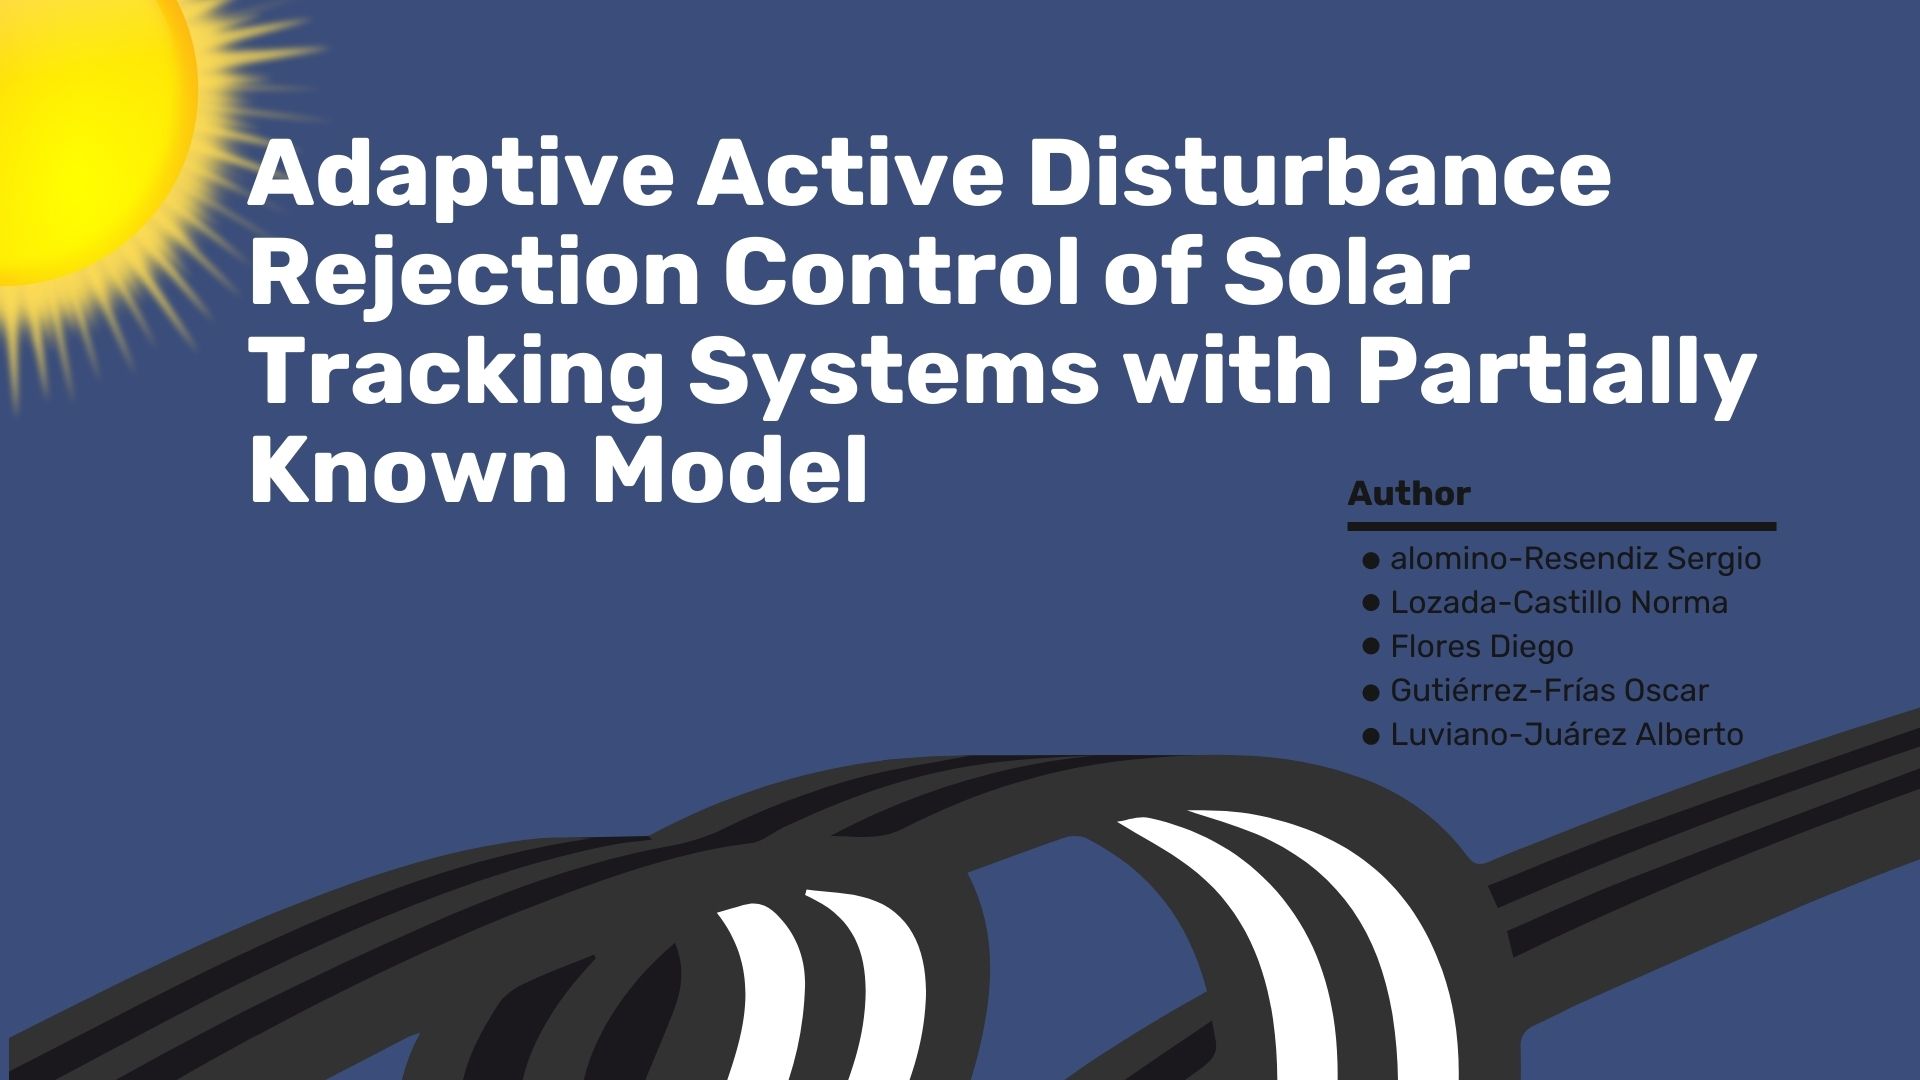 Adaptive Active Disturbance Rejection Control of Solar Tracking Systems with Partially Known Model